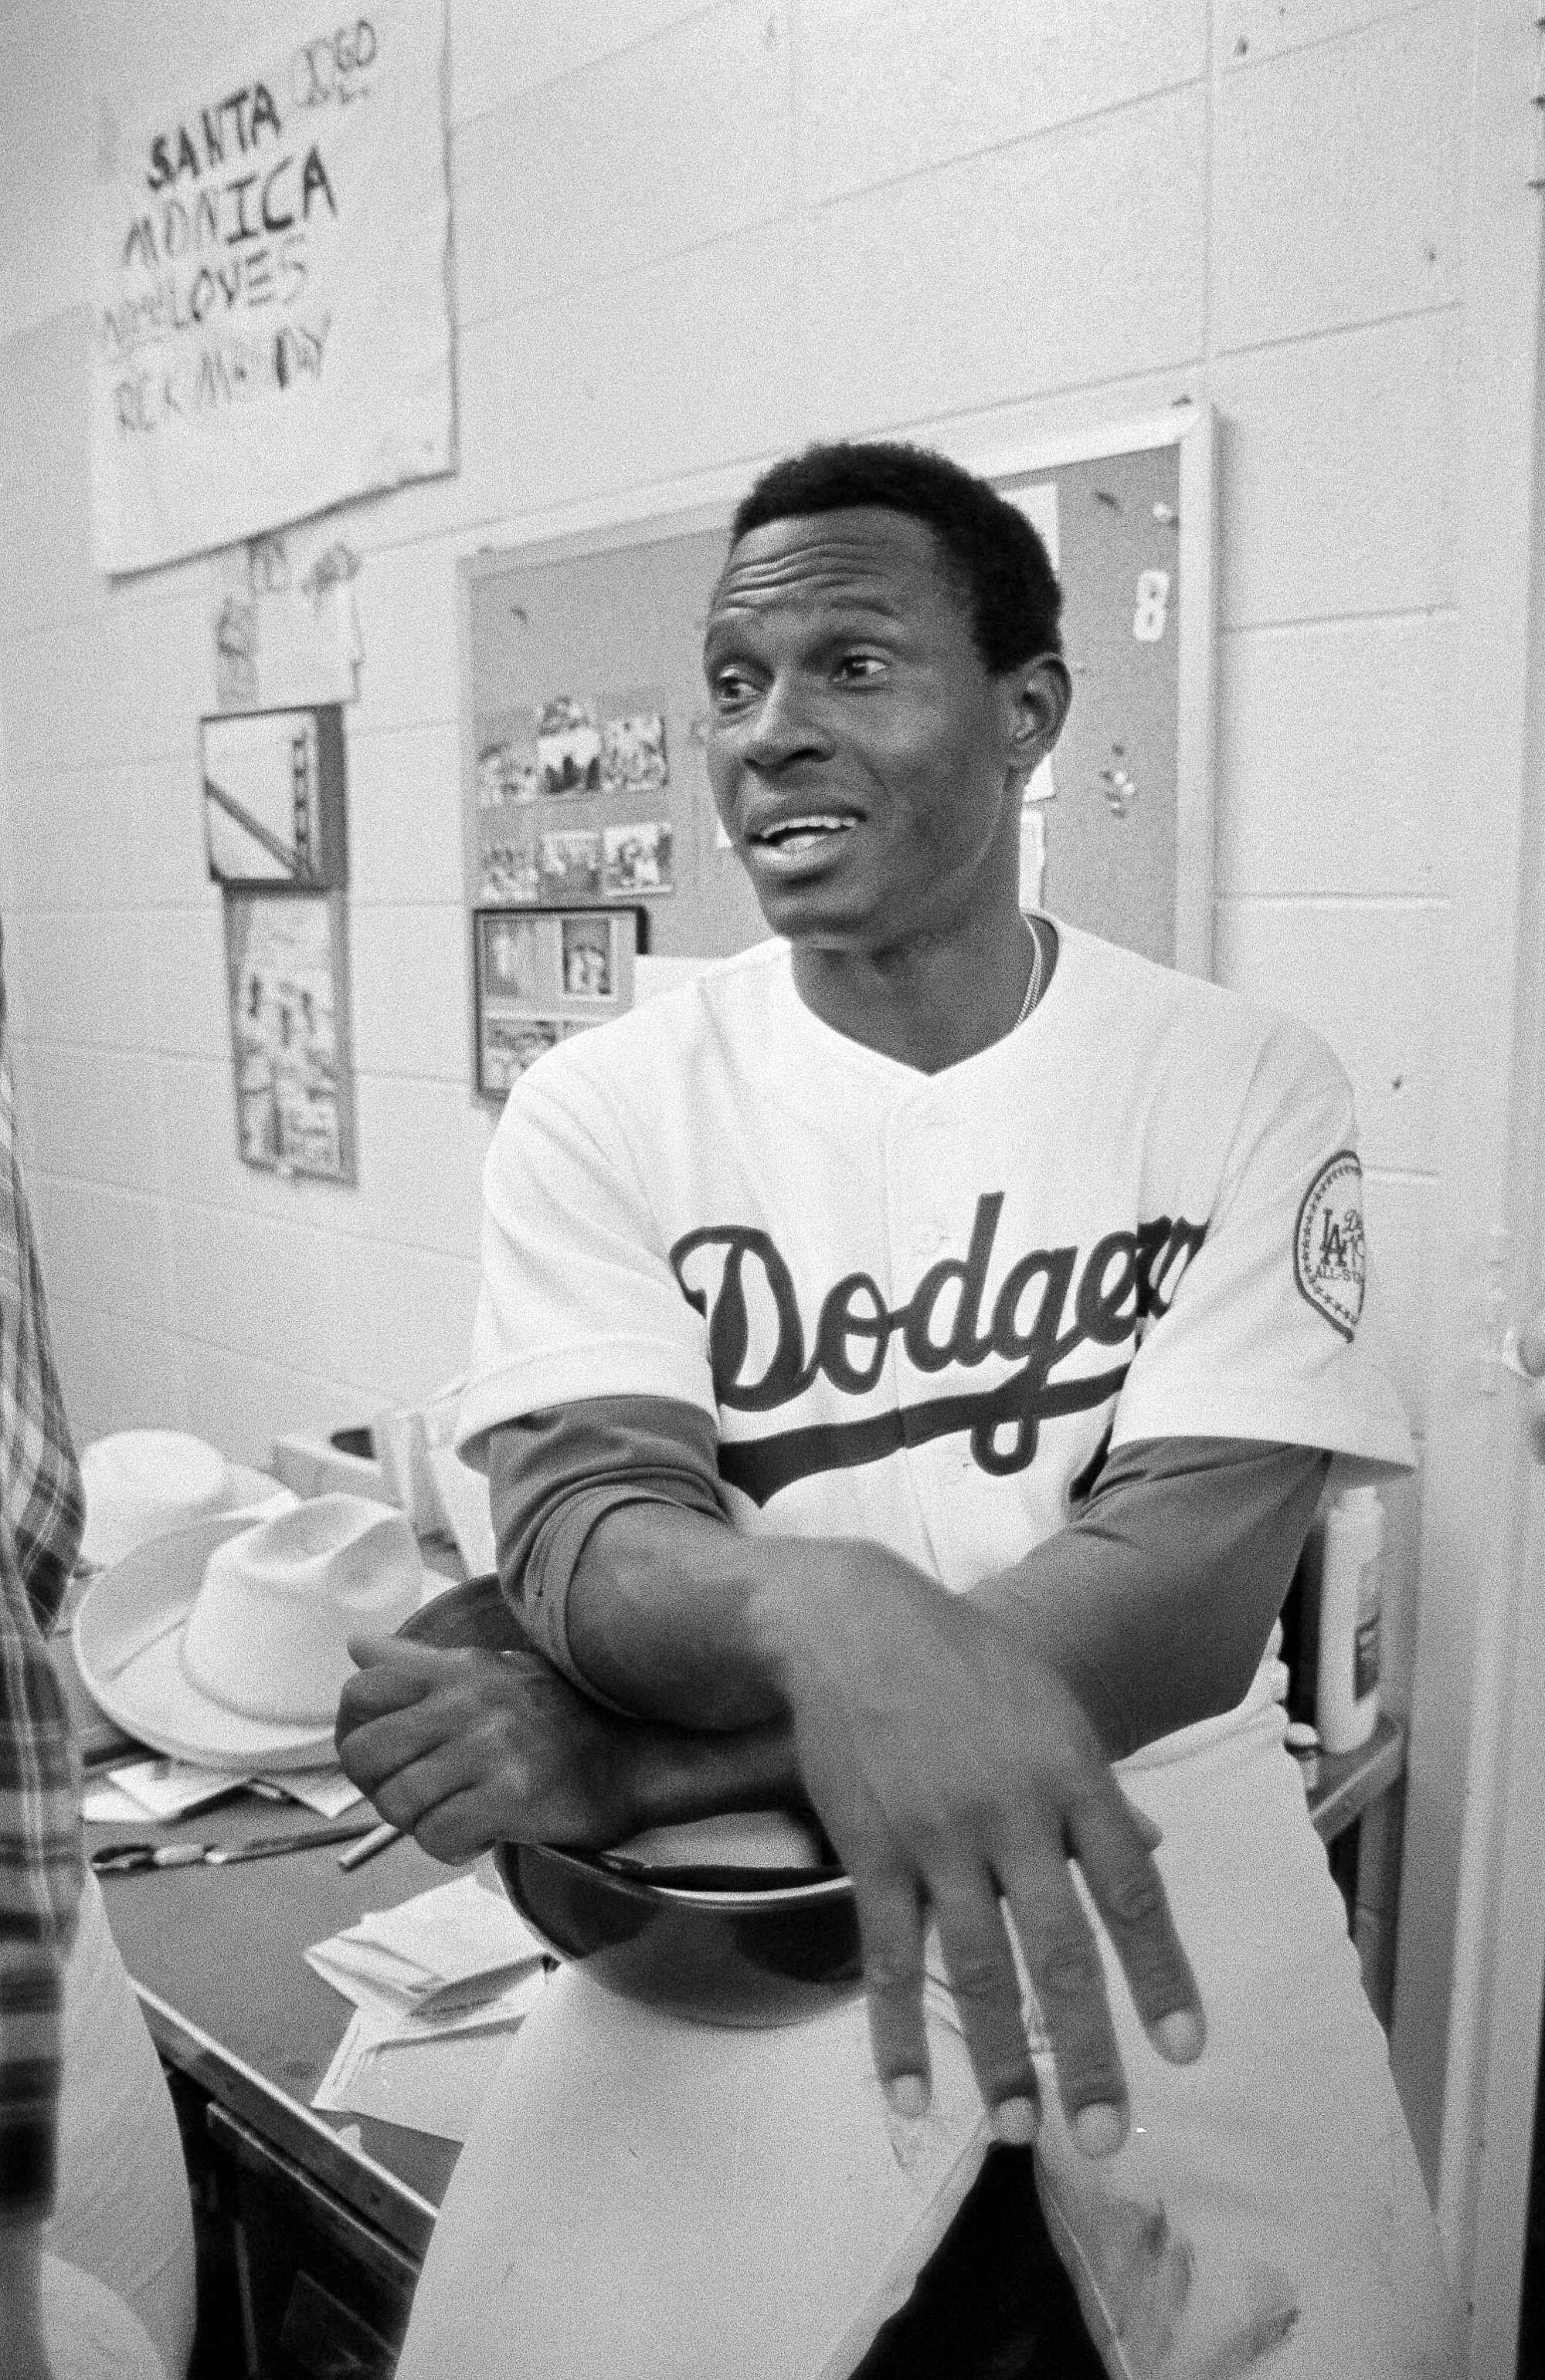 Manny Mota and Dodgers have been inseparable for 75 years - Los